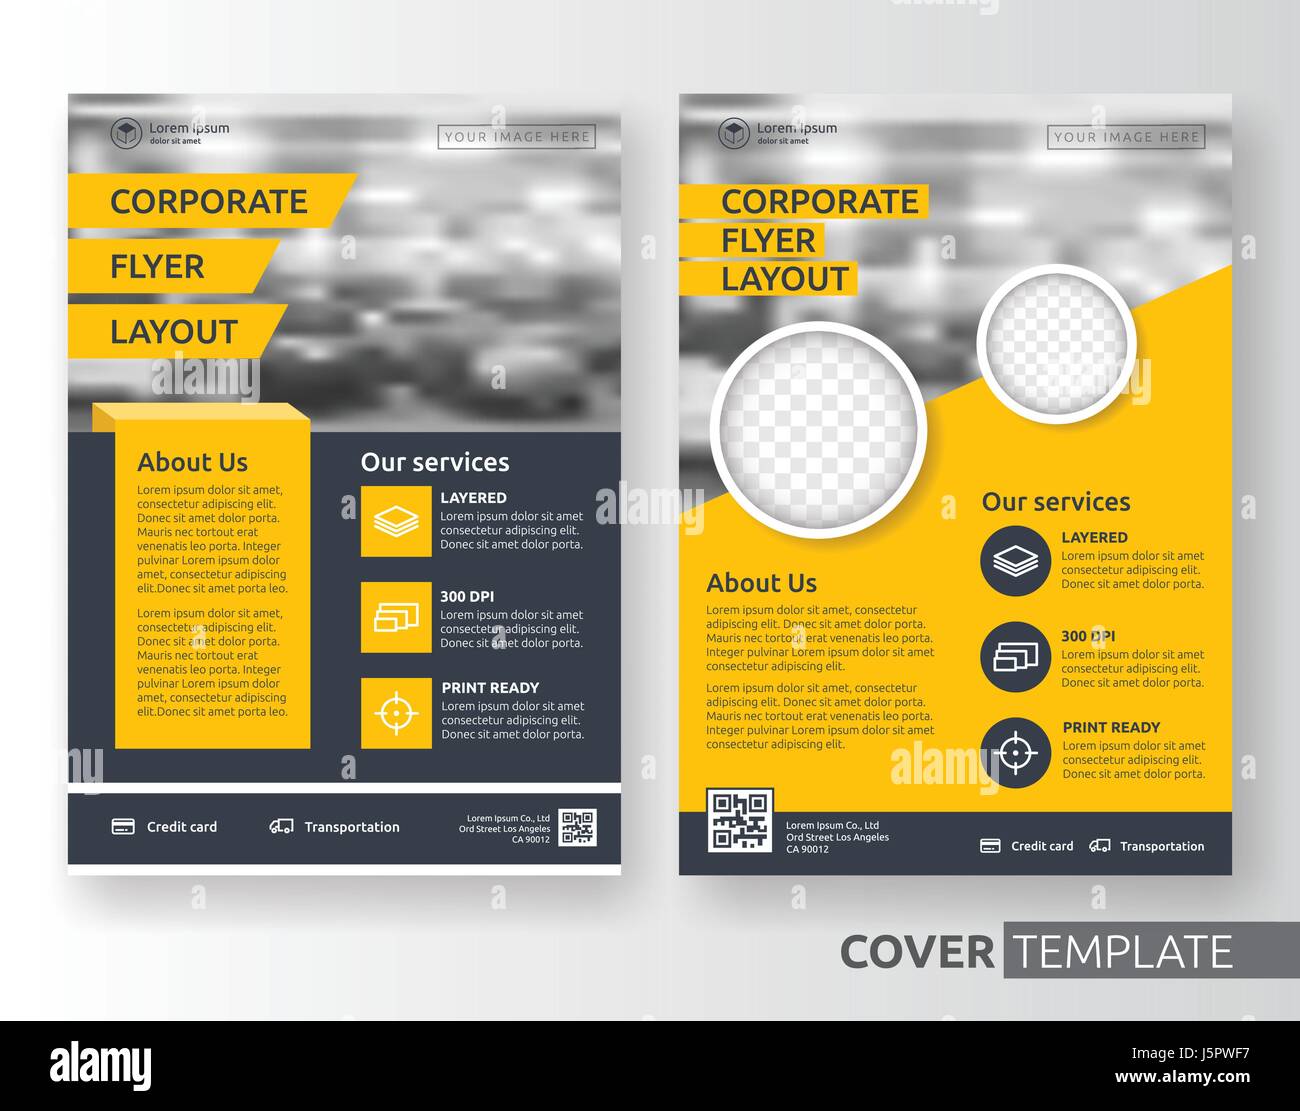 Multipurpose business corporate flyer layout design. Suitable for